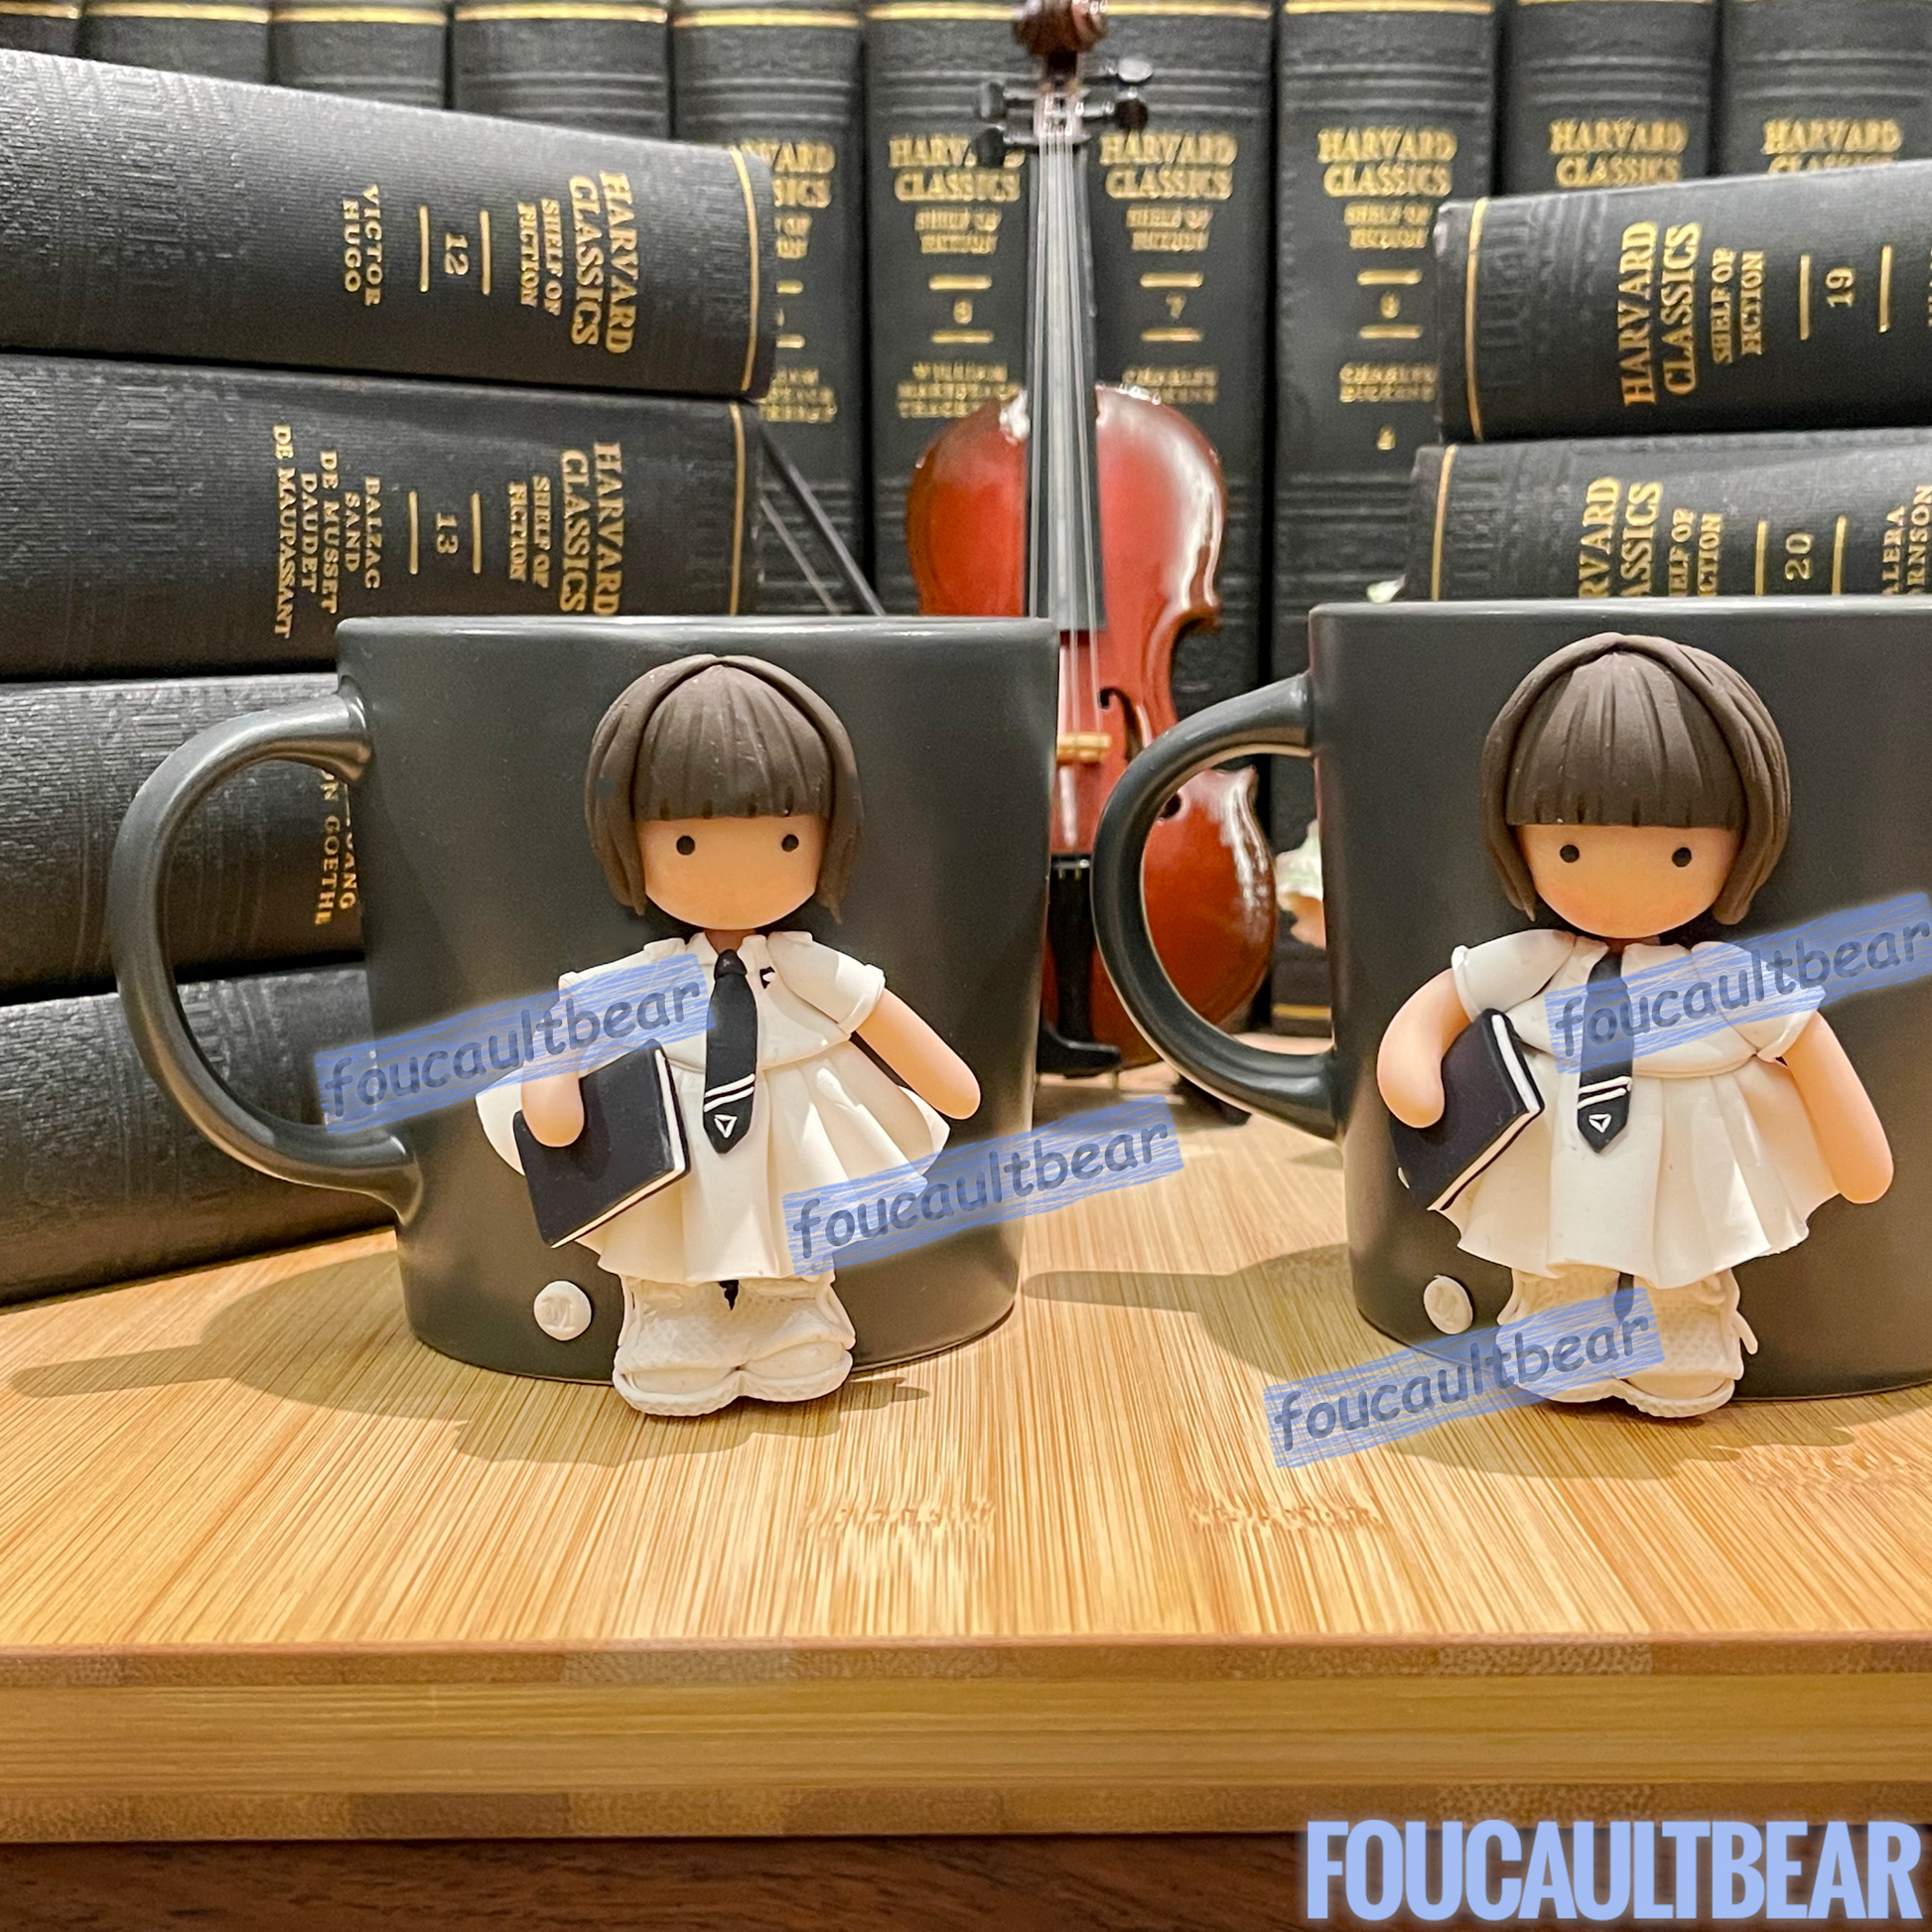 I'm very excited to debut my handcrafted "School Series" polymer clay figurine on mugs. Introducing for the first time, Chloe, of the Chloe and Caden series. Every Chloe and Caden figurine is handcrafted with lots of thought and care. They make great storage for pens, pencils, small rulers, etc....